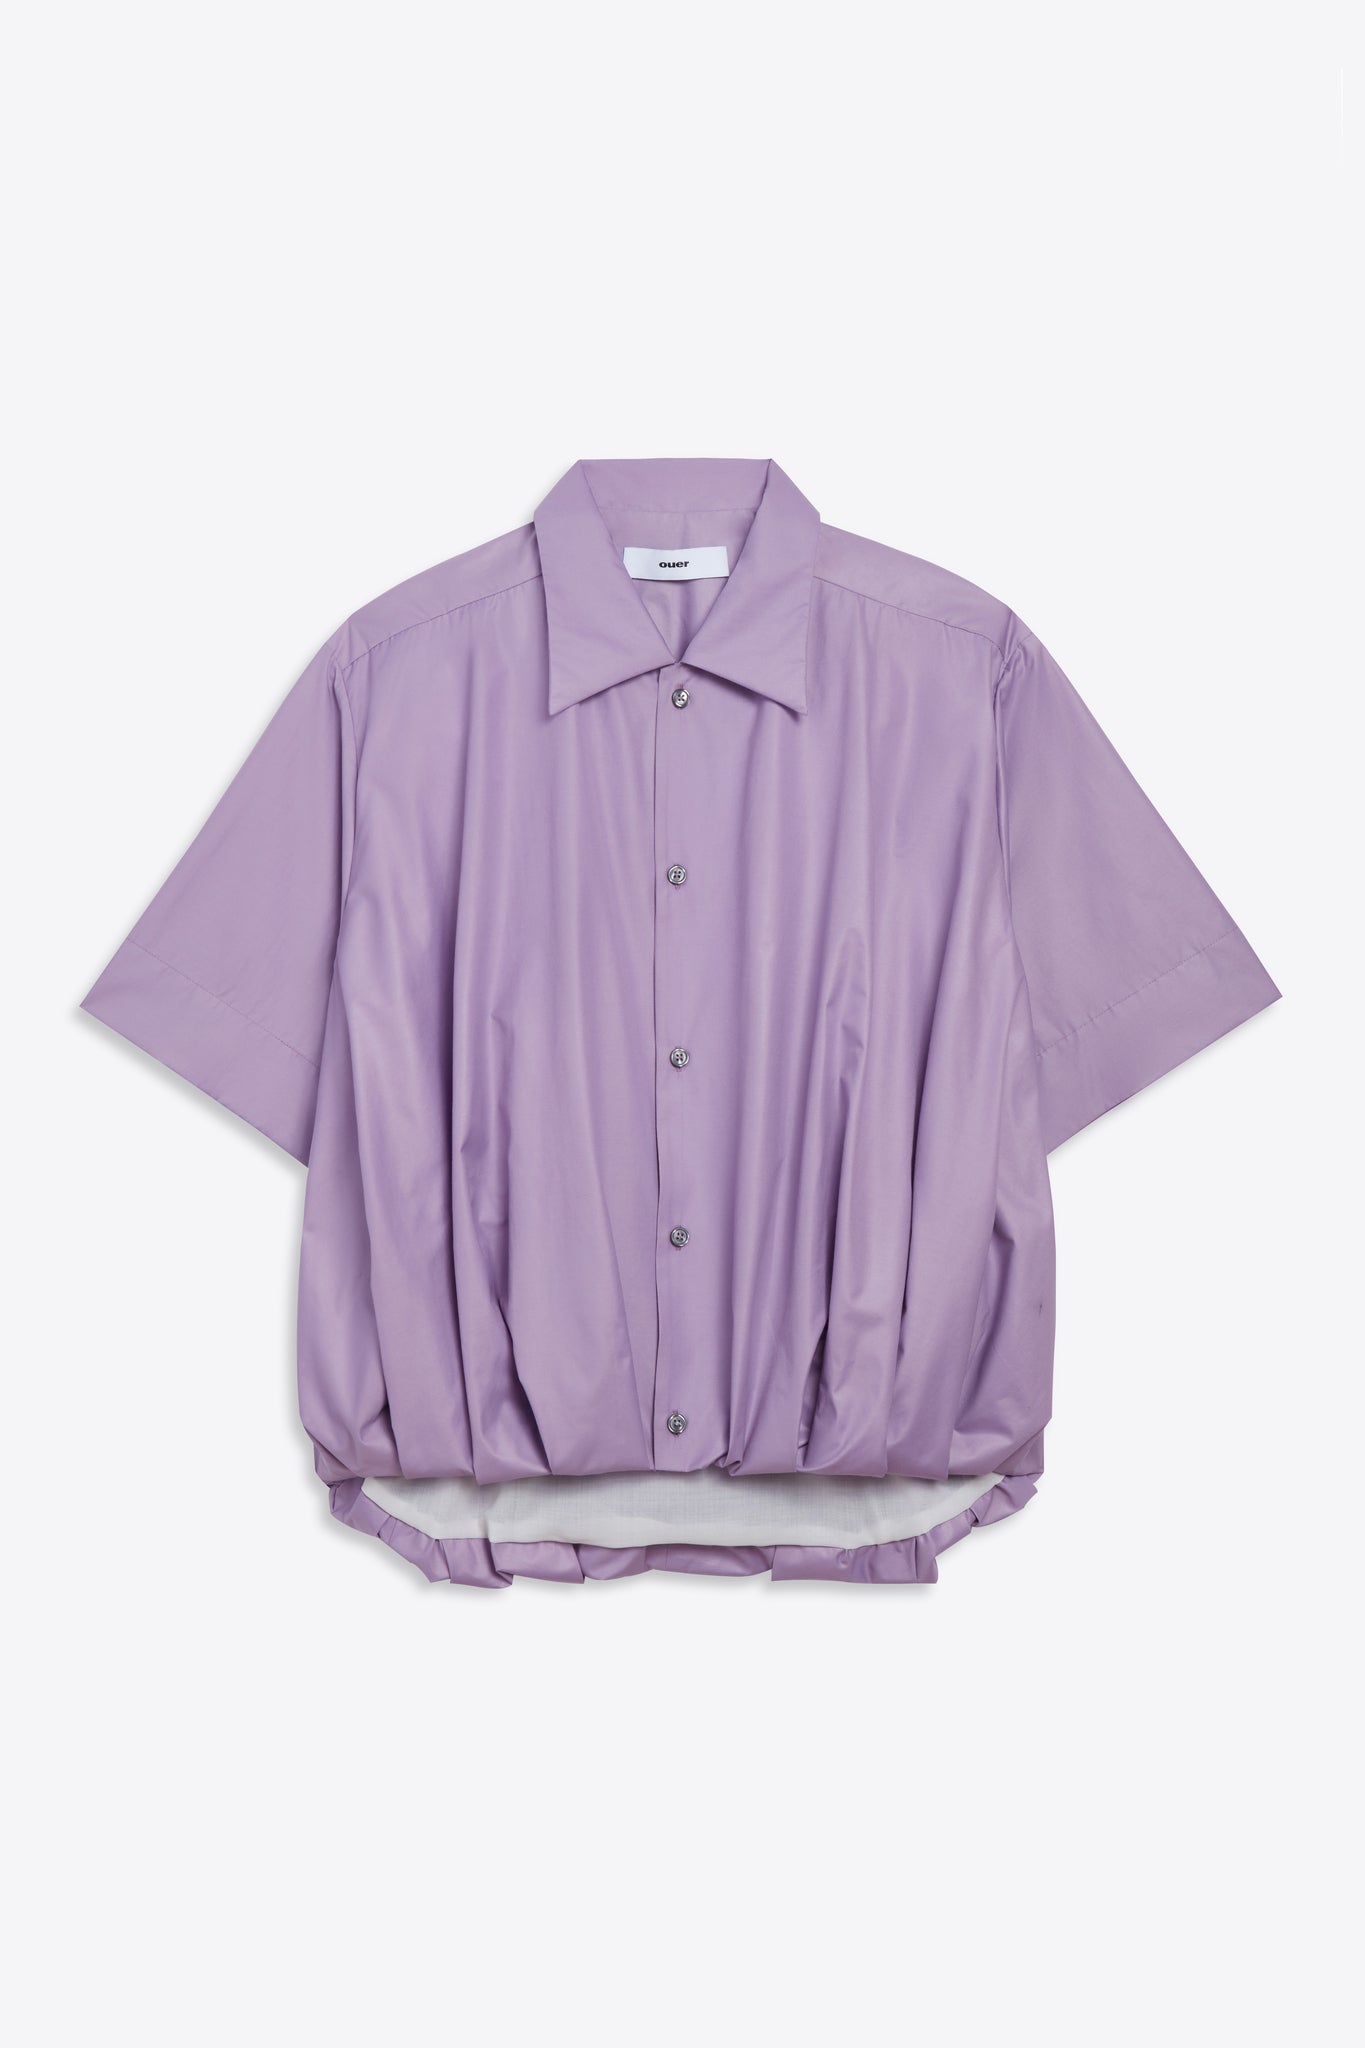 Bubble Shirt in Ditto